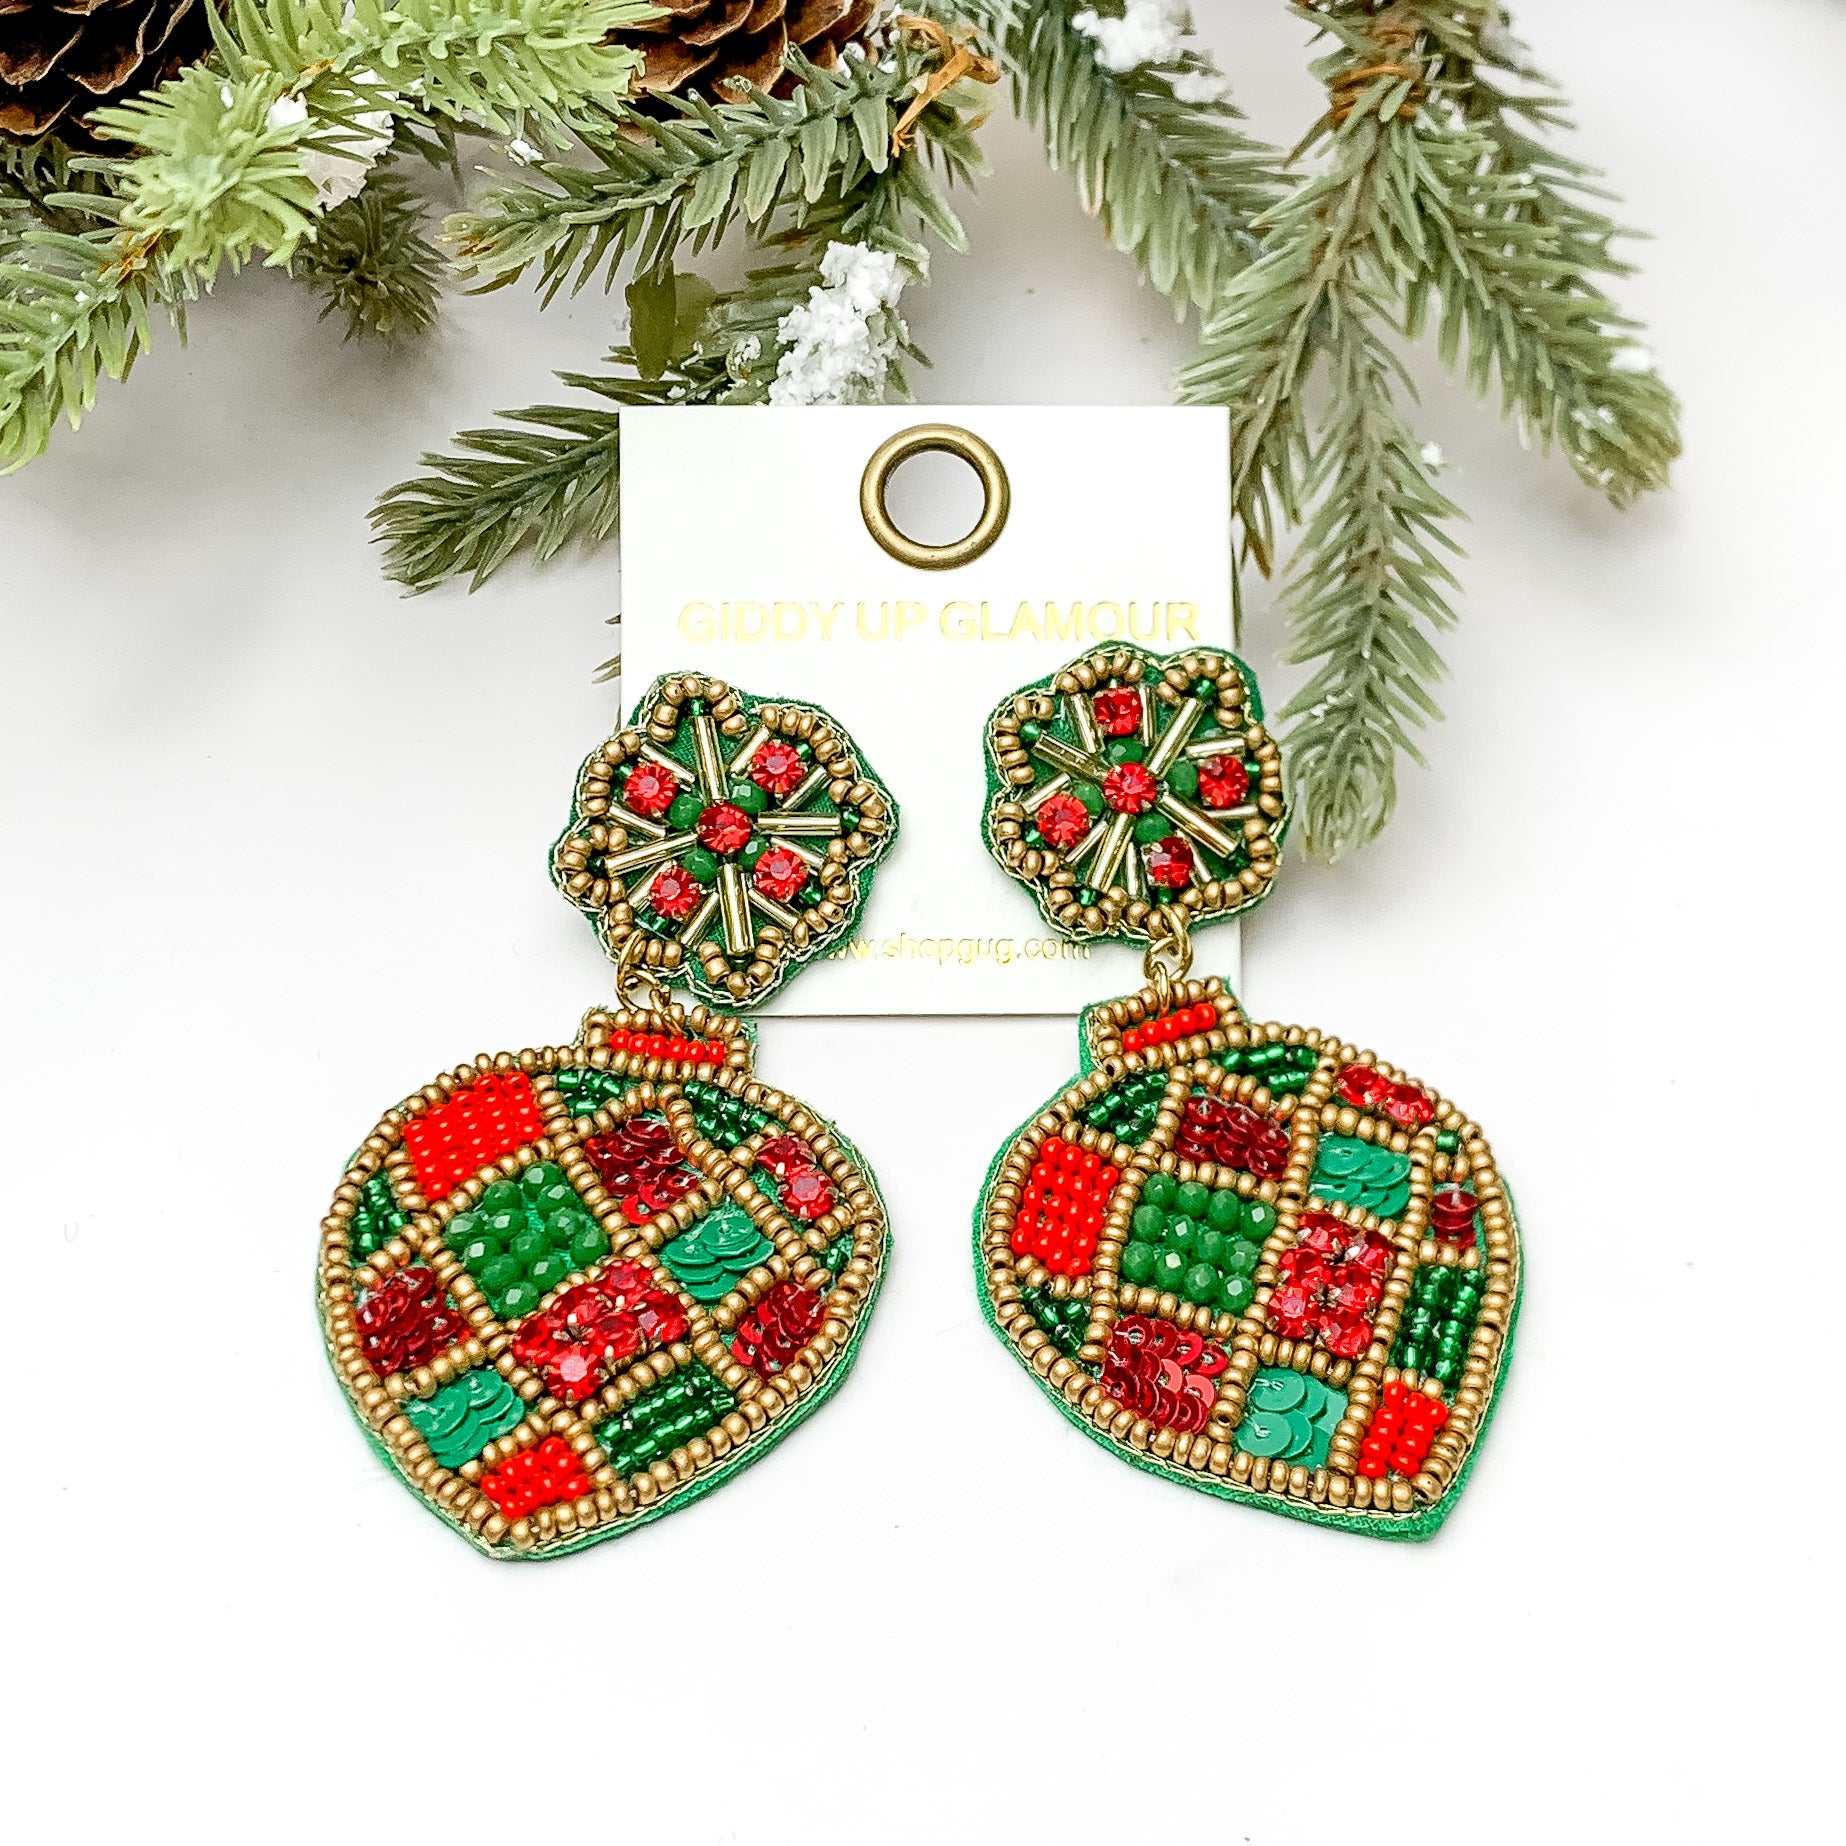 Beaded Post Back Ornament Earrings in Red and Green - Giddy Up Glamour Boutique